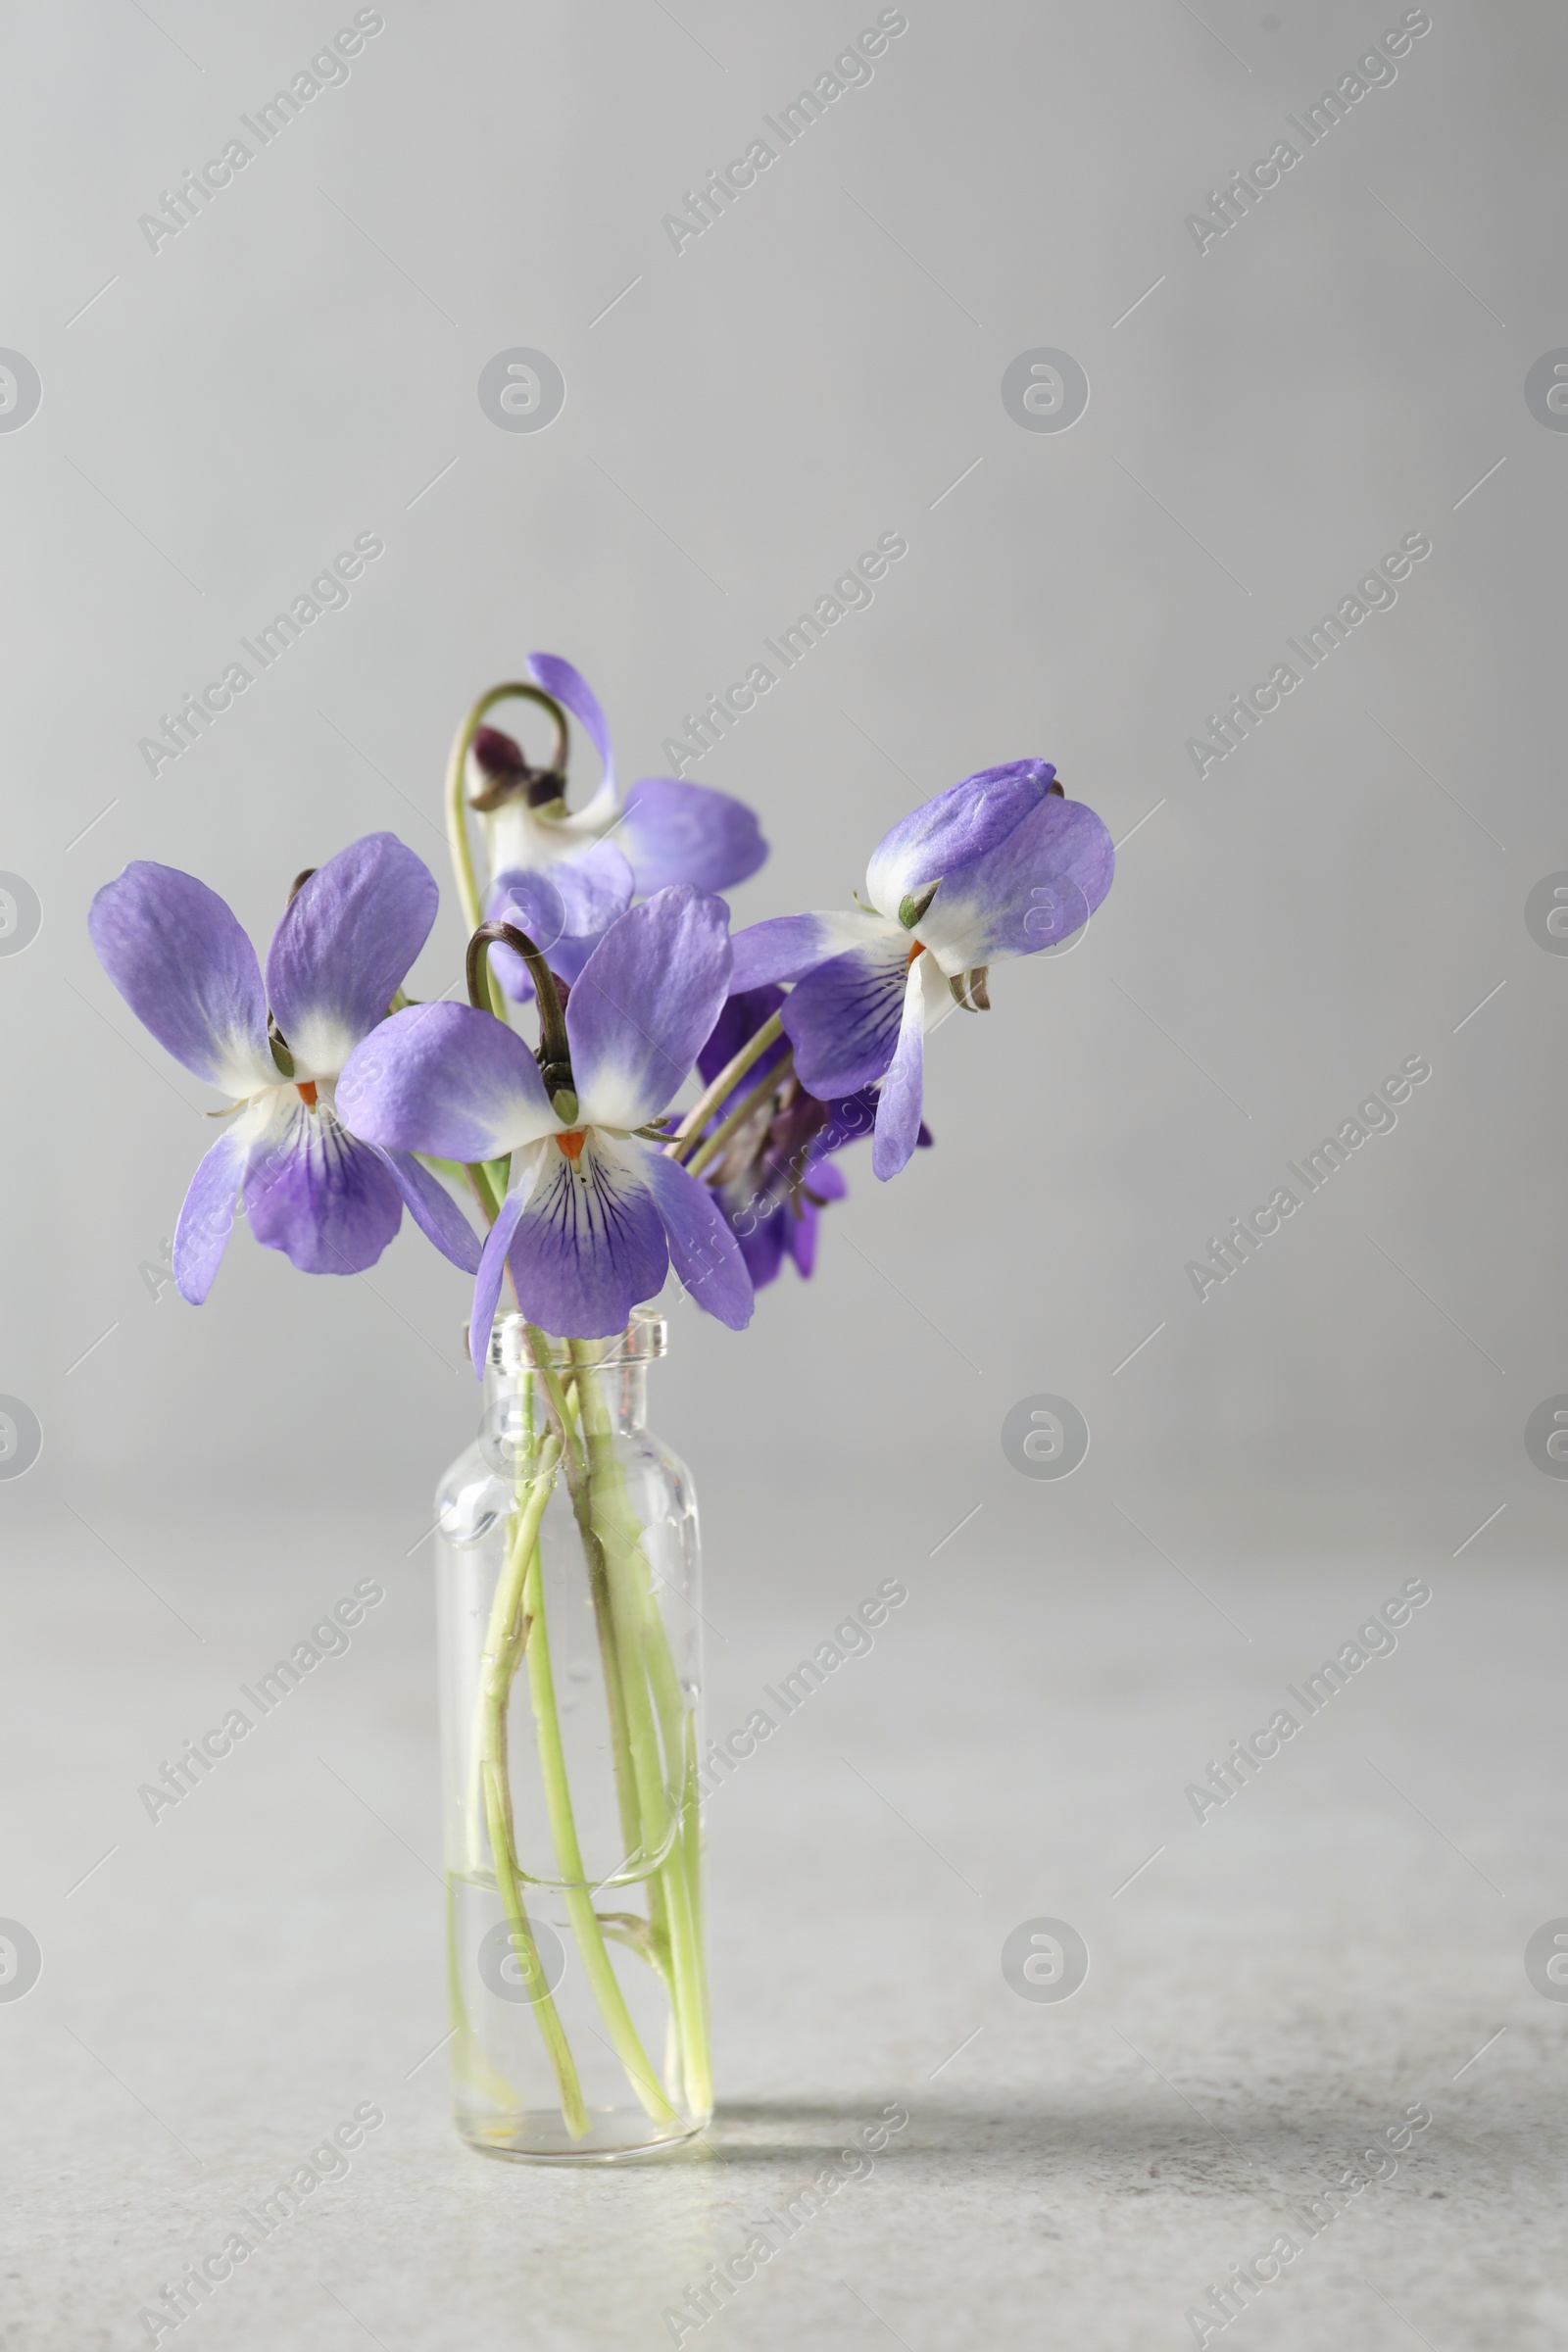 Photo of Beautiful wood violets on light grey background. Spring flowers